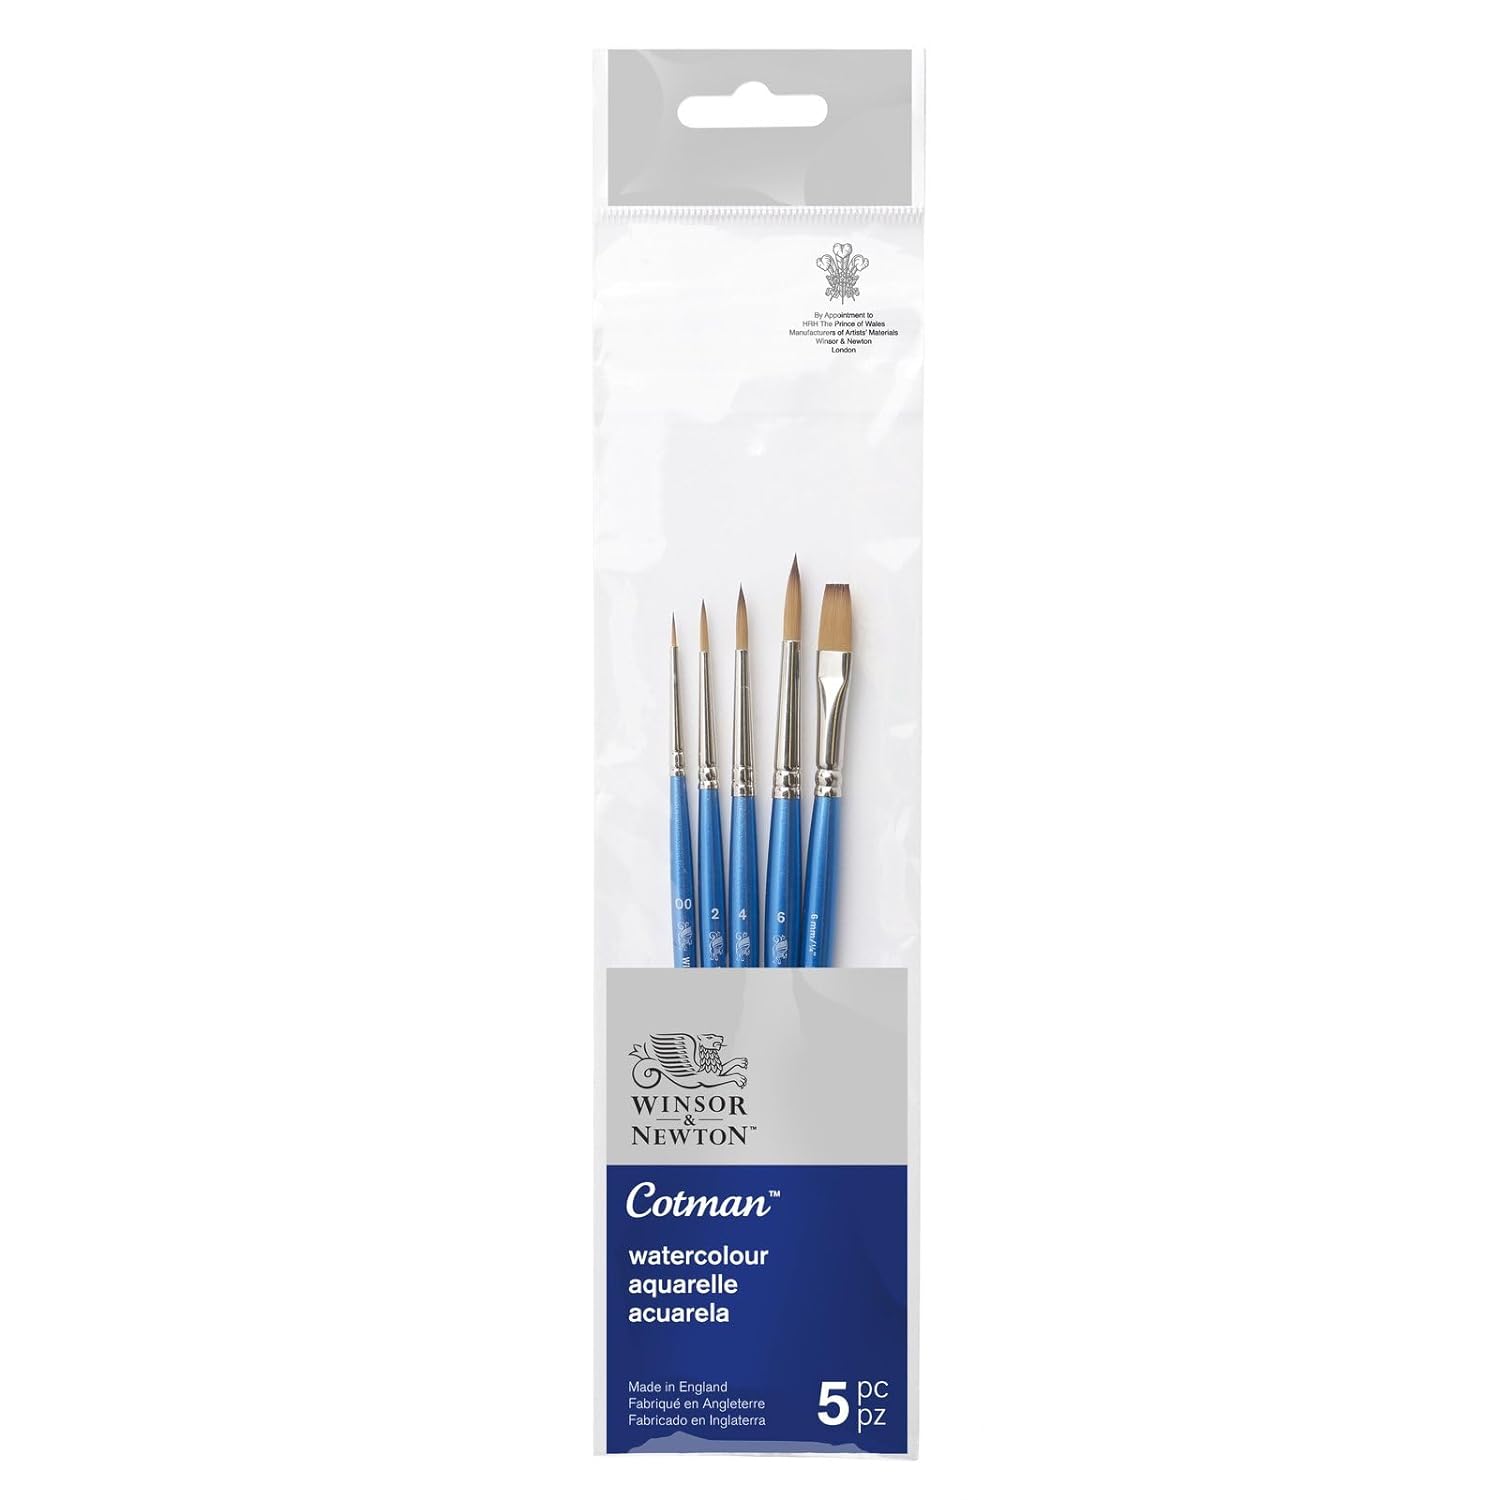 Winsor & Newton Cotman Watercolour Synthetic Hair Brush Pack of 5